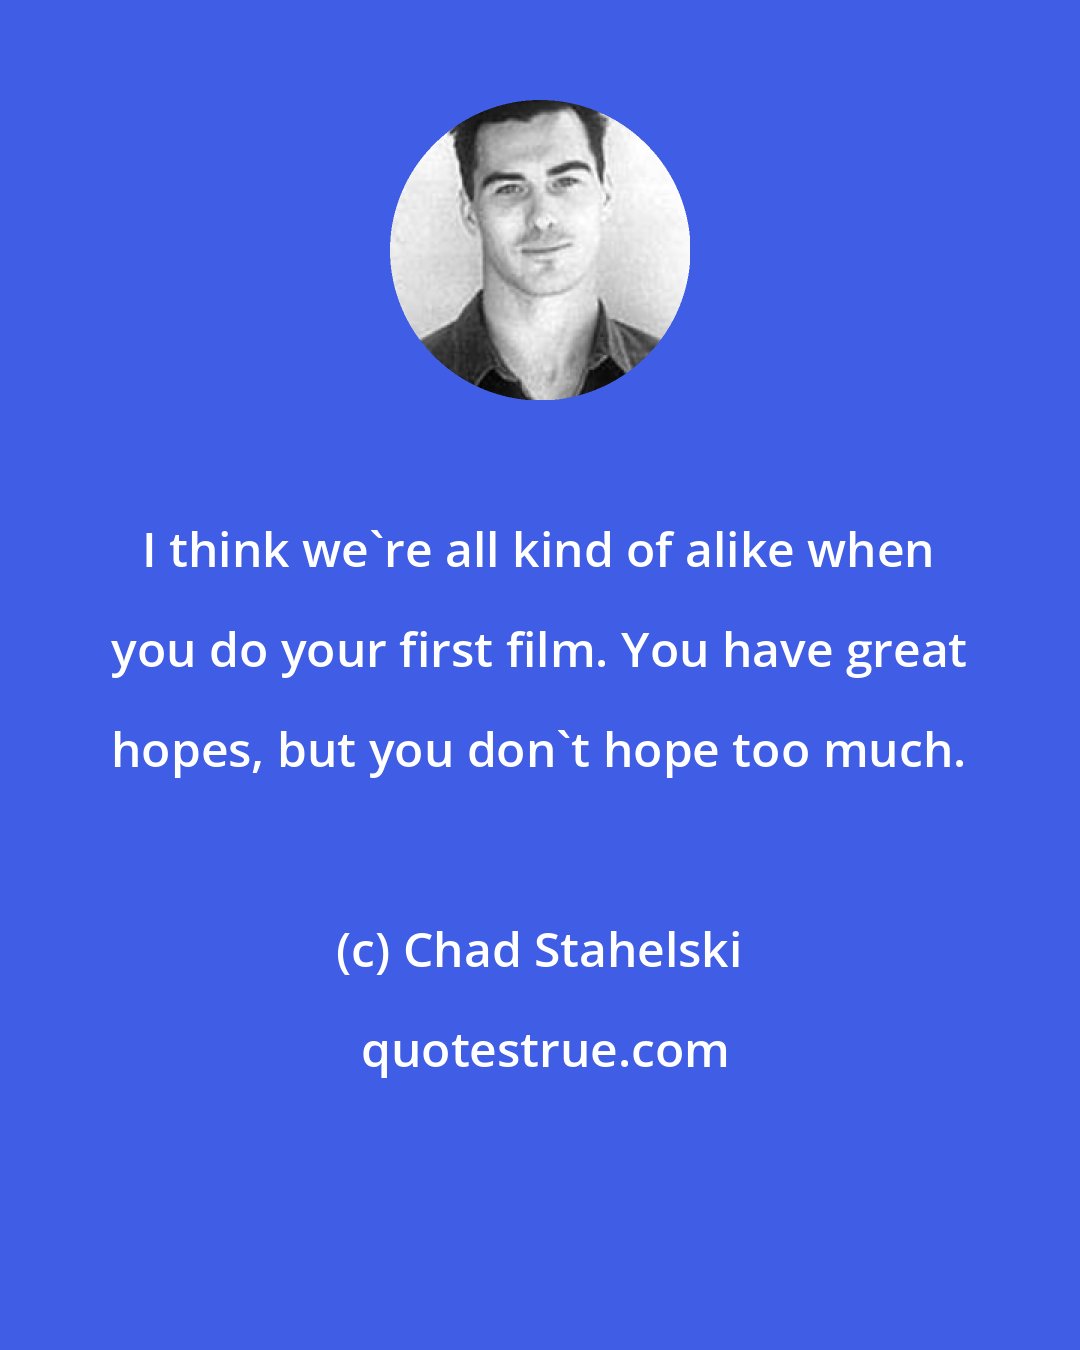 Chad Stahelski: I think we're all kind of alike when you do your first film. You have great hopes, but you don't hope too much.